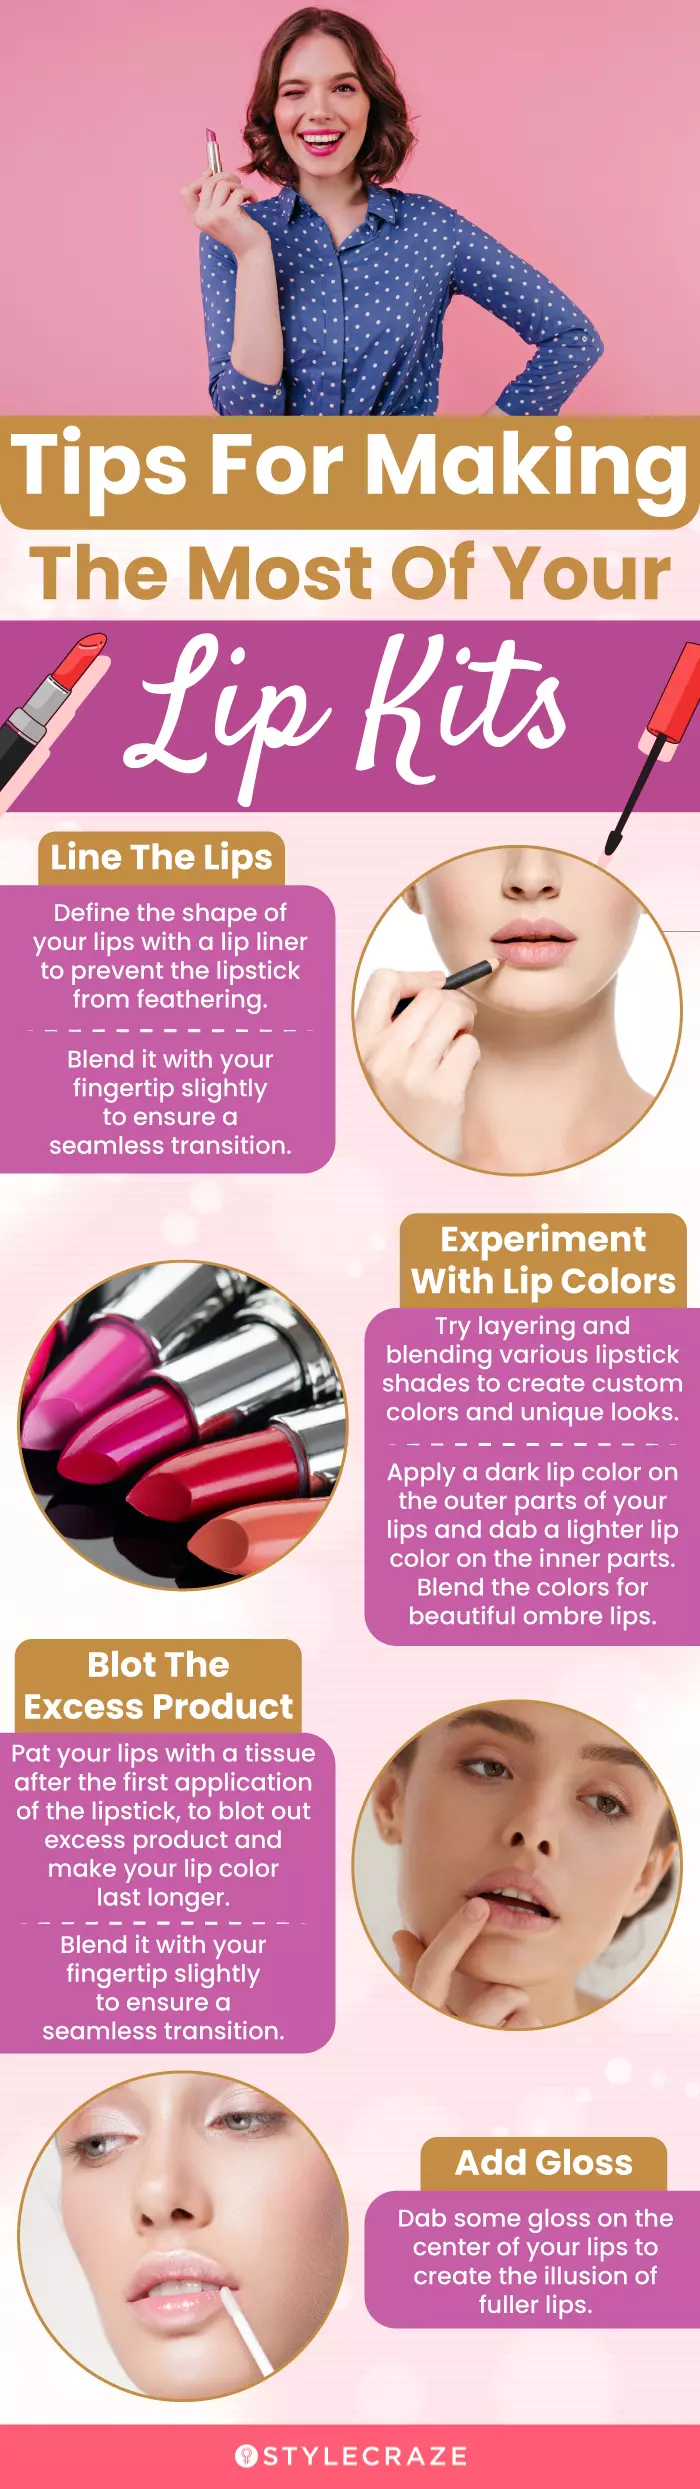 Tips For Making The Most Of Your Lip Kits (infographic)